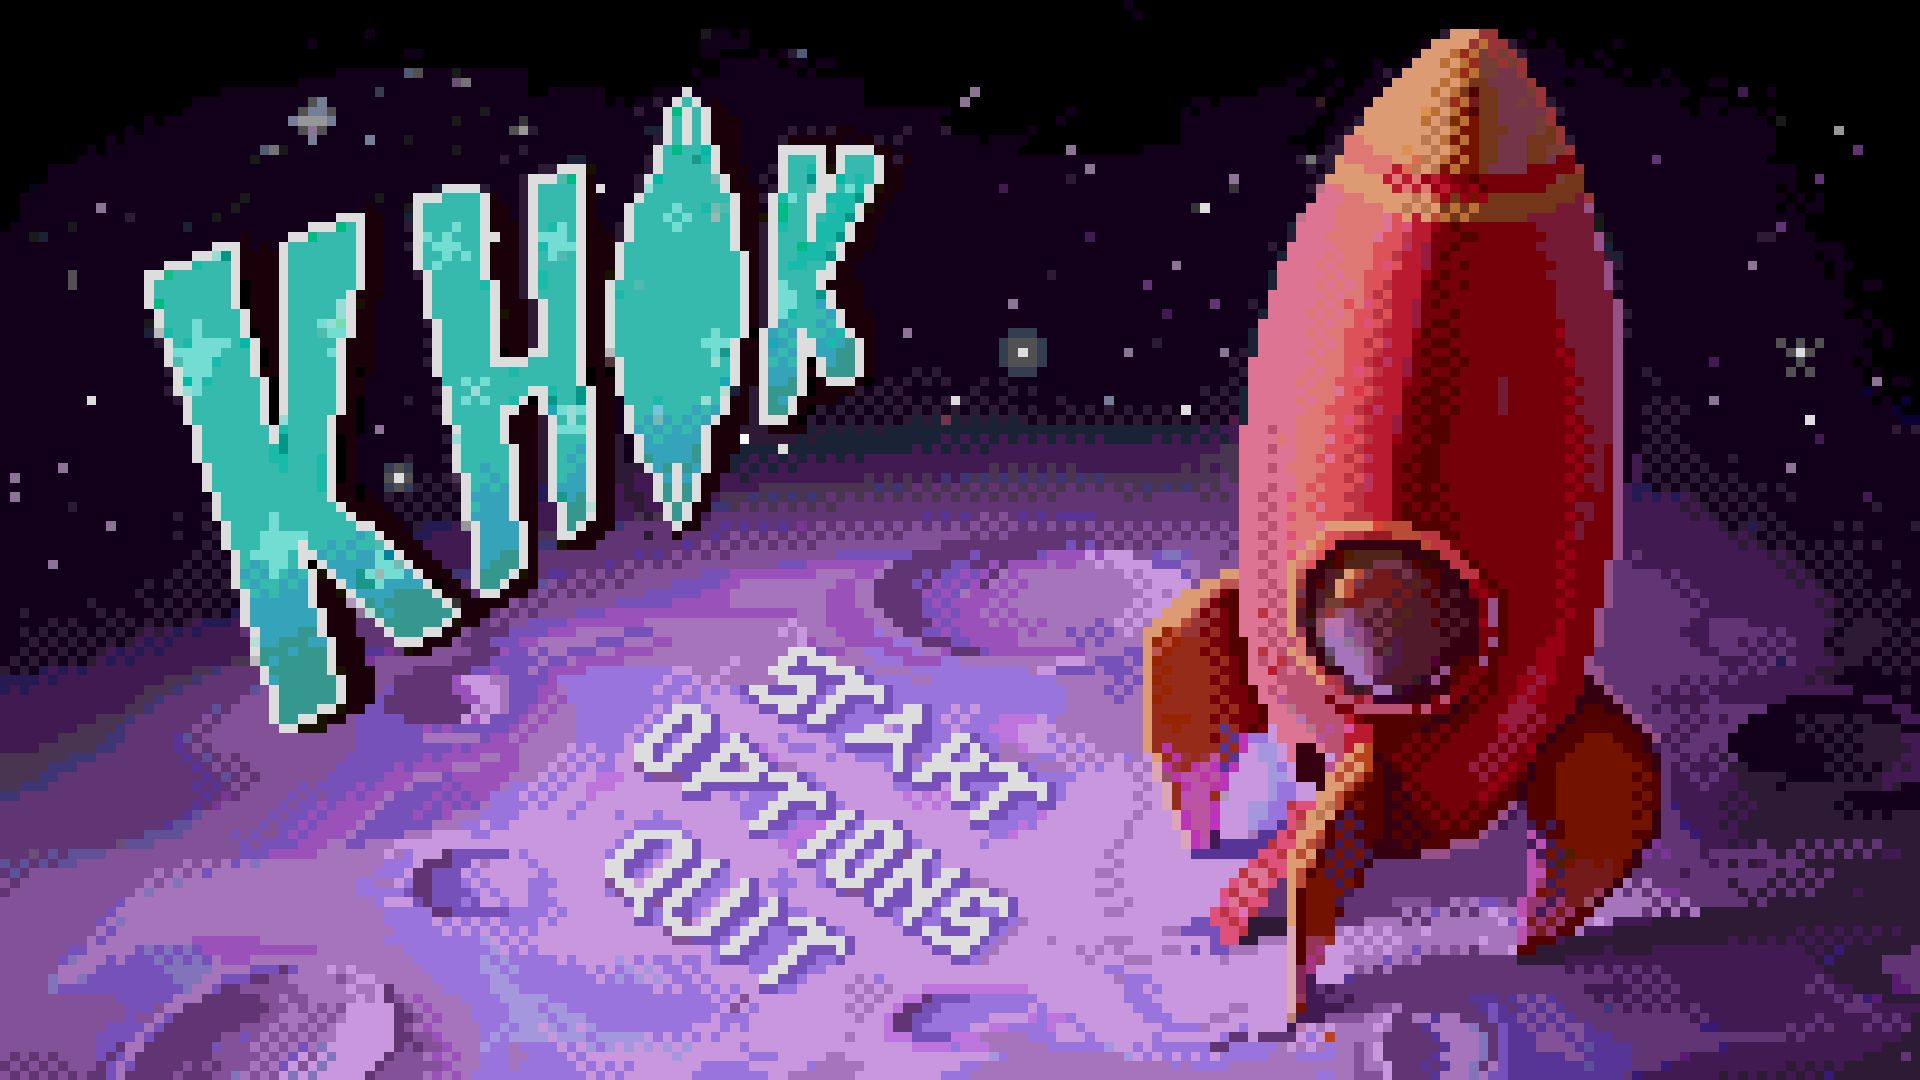 The start screen from KHOK, a short visual novel about space